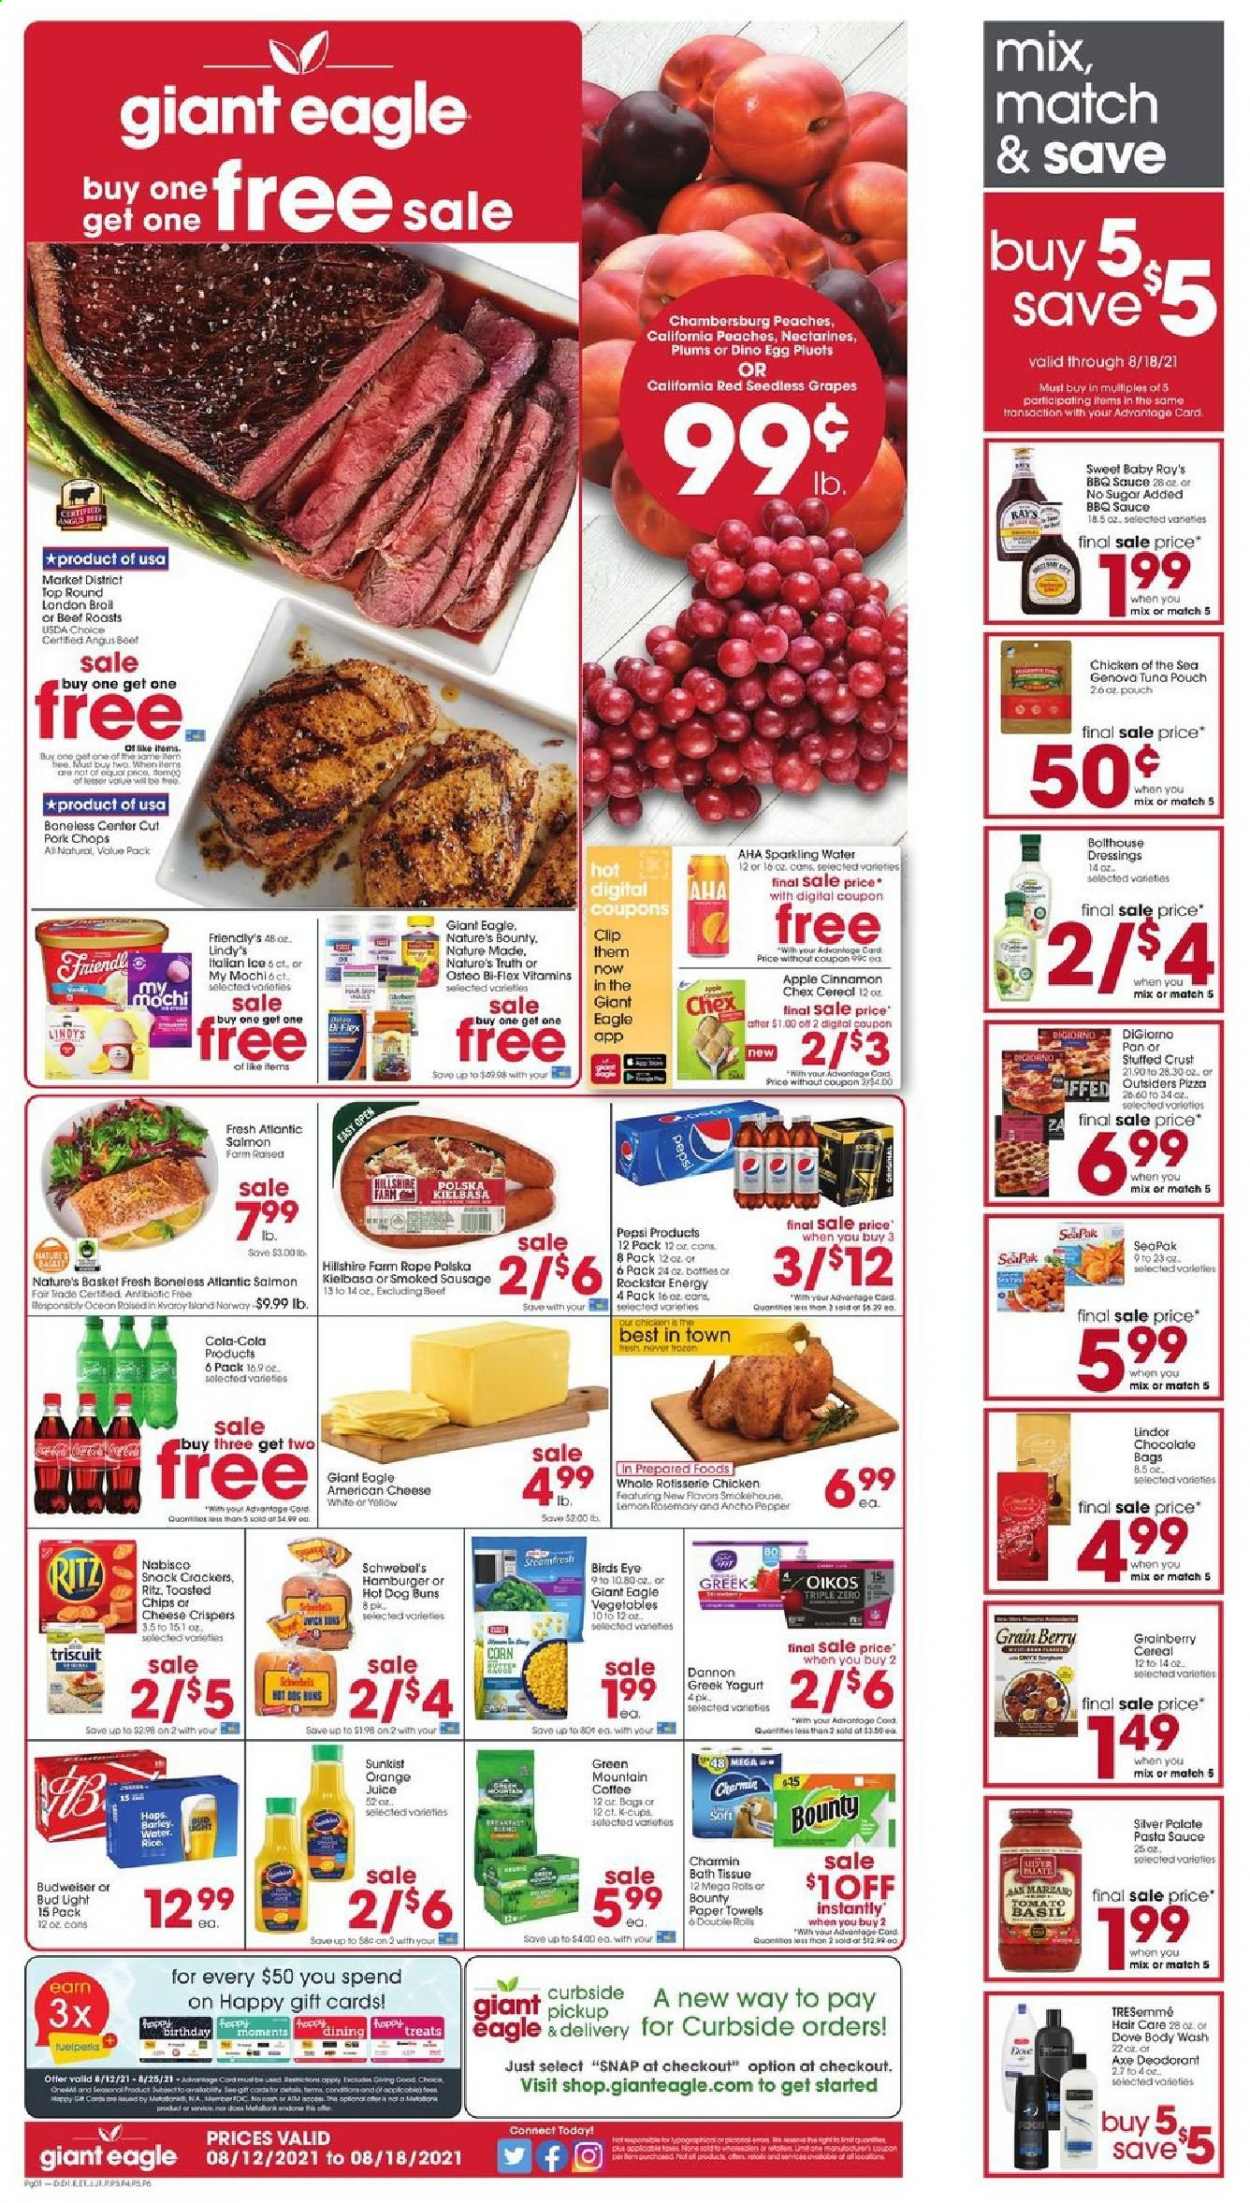 thumbnail - Giant Eagle Flyer - 08/12/2021 - 08/18/2021 - Sales products - Budweiser, seedless grapes, plums, buns, corn, grapes, cod, salmon, tuna, pizza, chicken roast, pasta sauce, sauce, Bird's Eye, Hillshire Farm, sausage, smoked sausage, kielbasa, american cheese, greek yoghurt, yoghurt, Oikos, Dannon, eggs, Friendly's Ice Cream, chocolate, snack, Lindor, crackers, RITZ, chips, Chicken of the Sea, cereals, rice, esponja, cinnamon, BBQ sauce, orange juice, juice, Rockstar, sparkling water, coffee, coffee capsules, K-Cups, Green Mountain, beer, Bud Light, pork chops, pork meat, Dove, bath tissue, kitchen towels, paper towels, Charmin, body wash, TRESemmé, anti-perspirant, deodorant, basket, pan, Moments, Nature Made, Nature's Bounty, nectarines, peaches. Page 1.